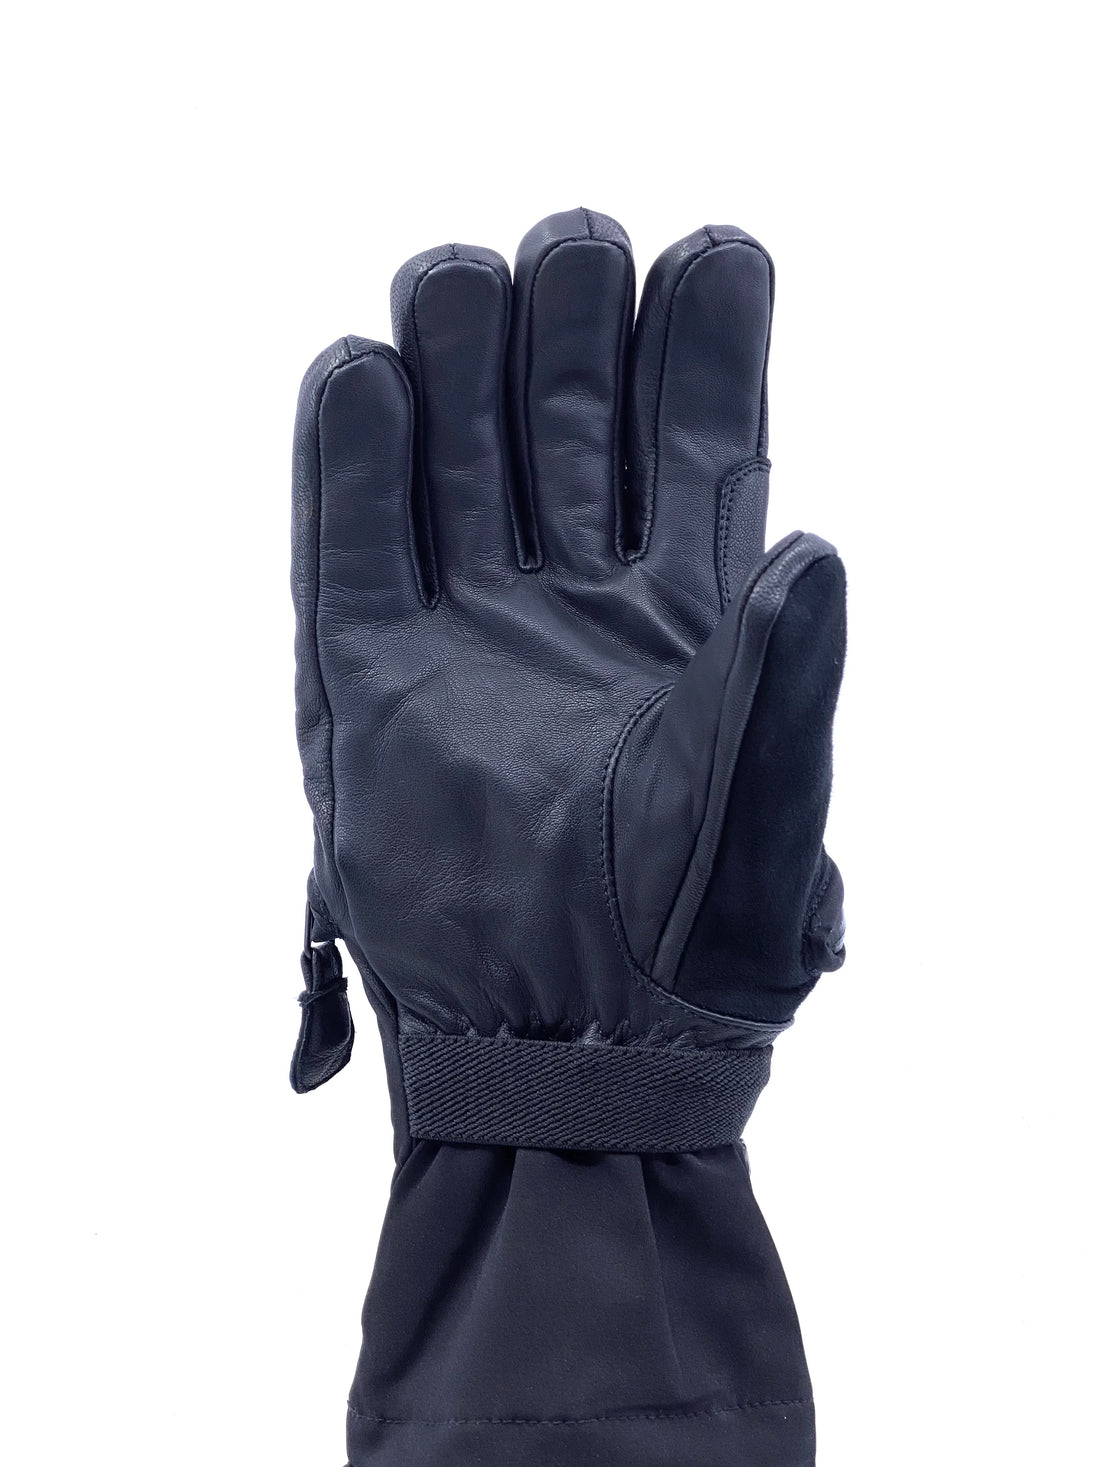 Black and Black Extra Thin Palm Knuckle Pad Gloves